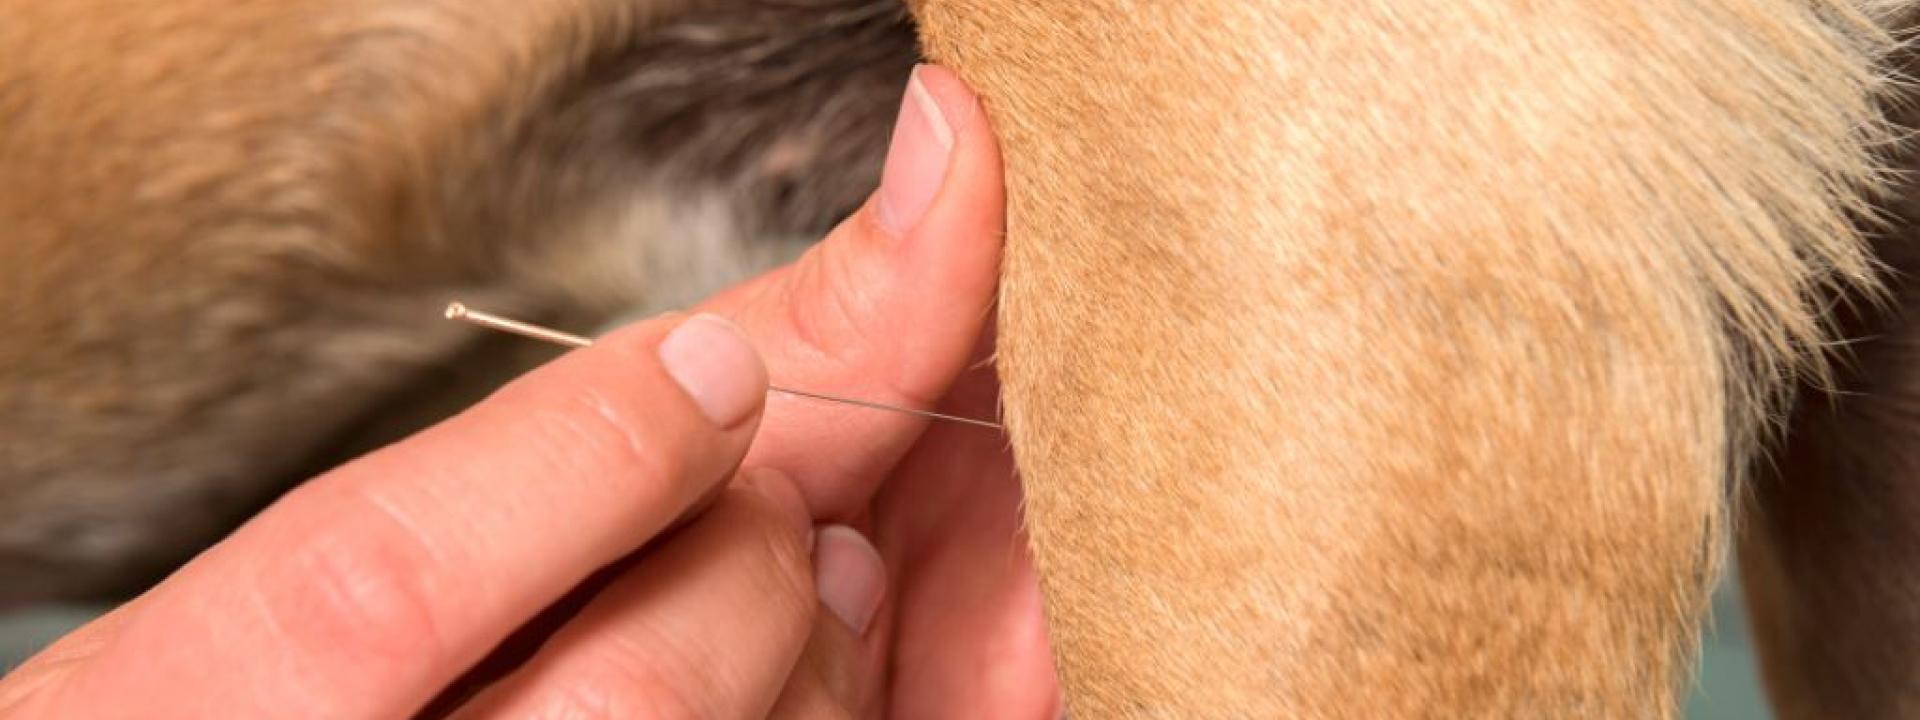 Close up acupuncture with dog needle in hand